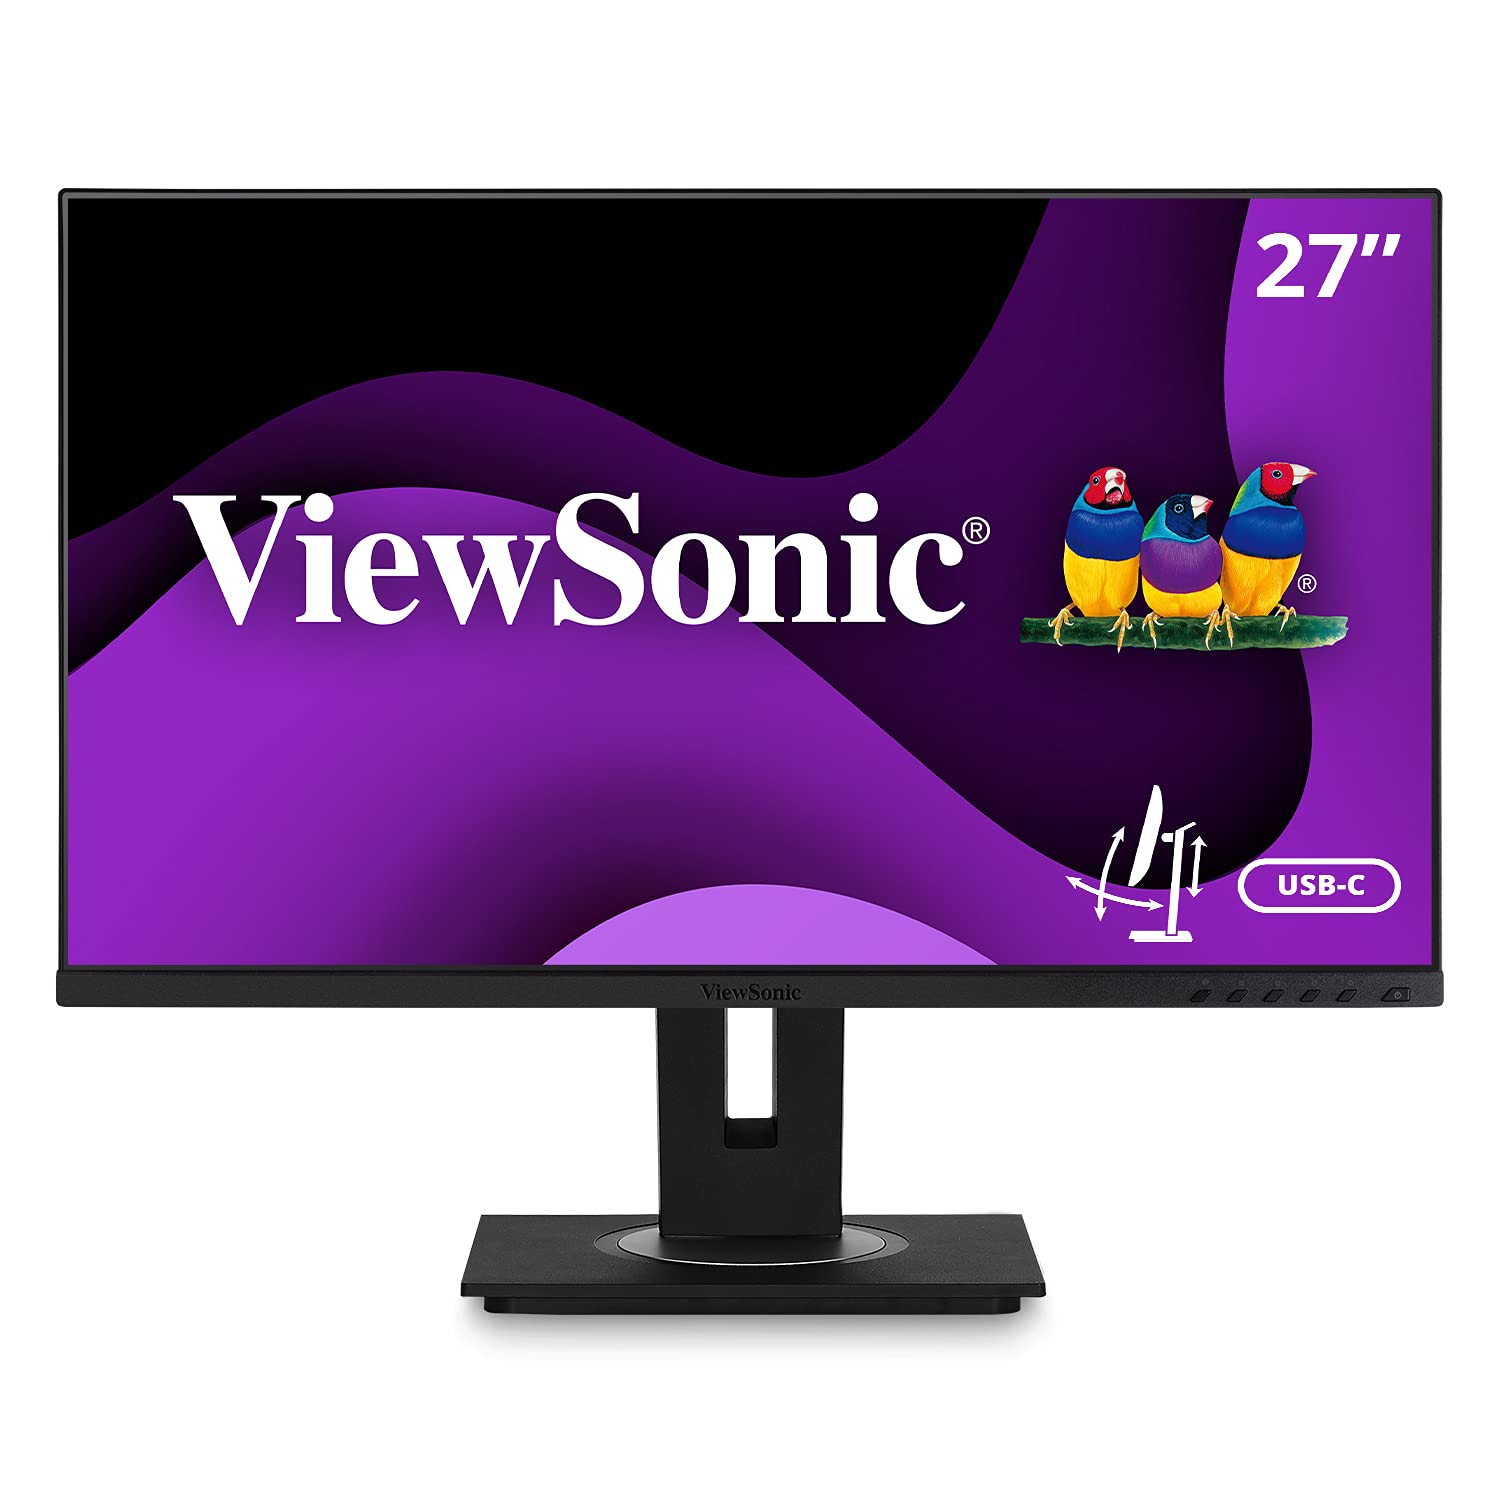 ViewSonic VG2755 27 Inch IPS 1080p Monitor with USB 3.1 Type C HDMI DisplayPort VGA and 40 Degree Tilt Ergonomics for Home and Office Black